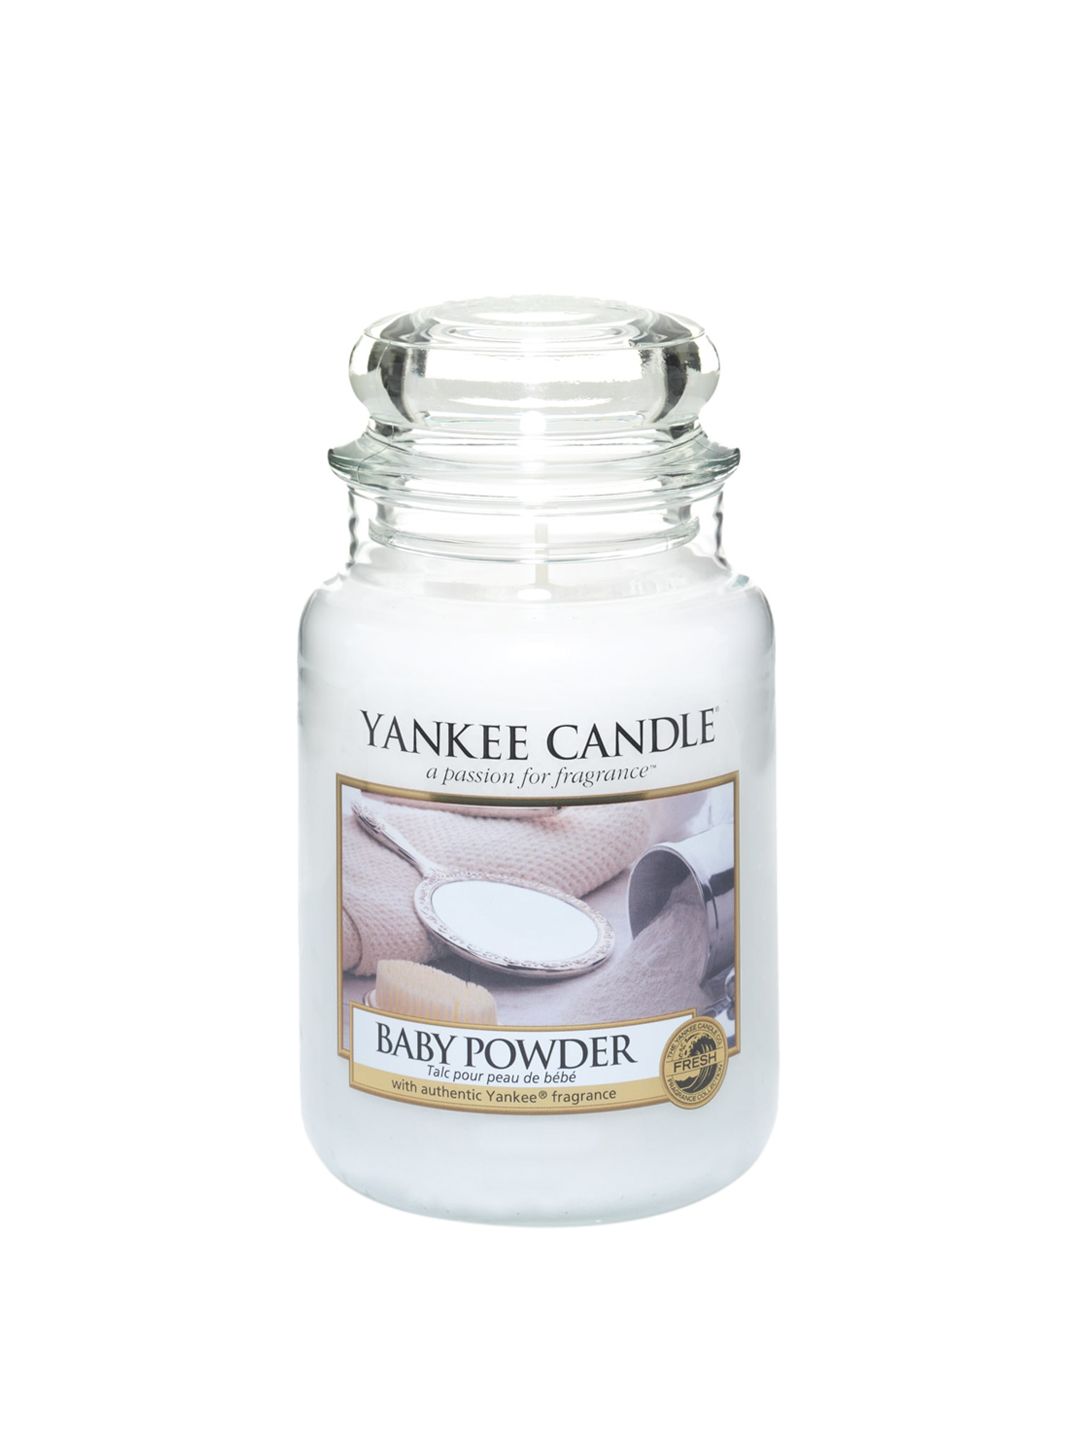 YANKEE CANDLE White Classic Large Jar Baby Powder Scented Candles Price in India